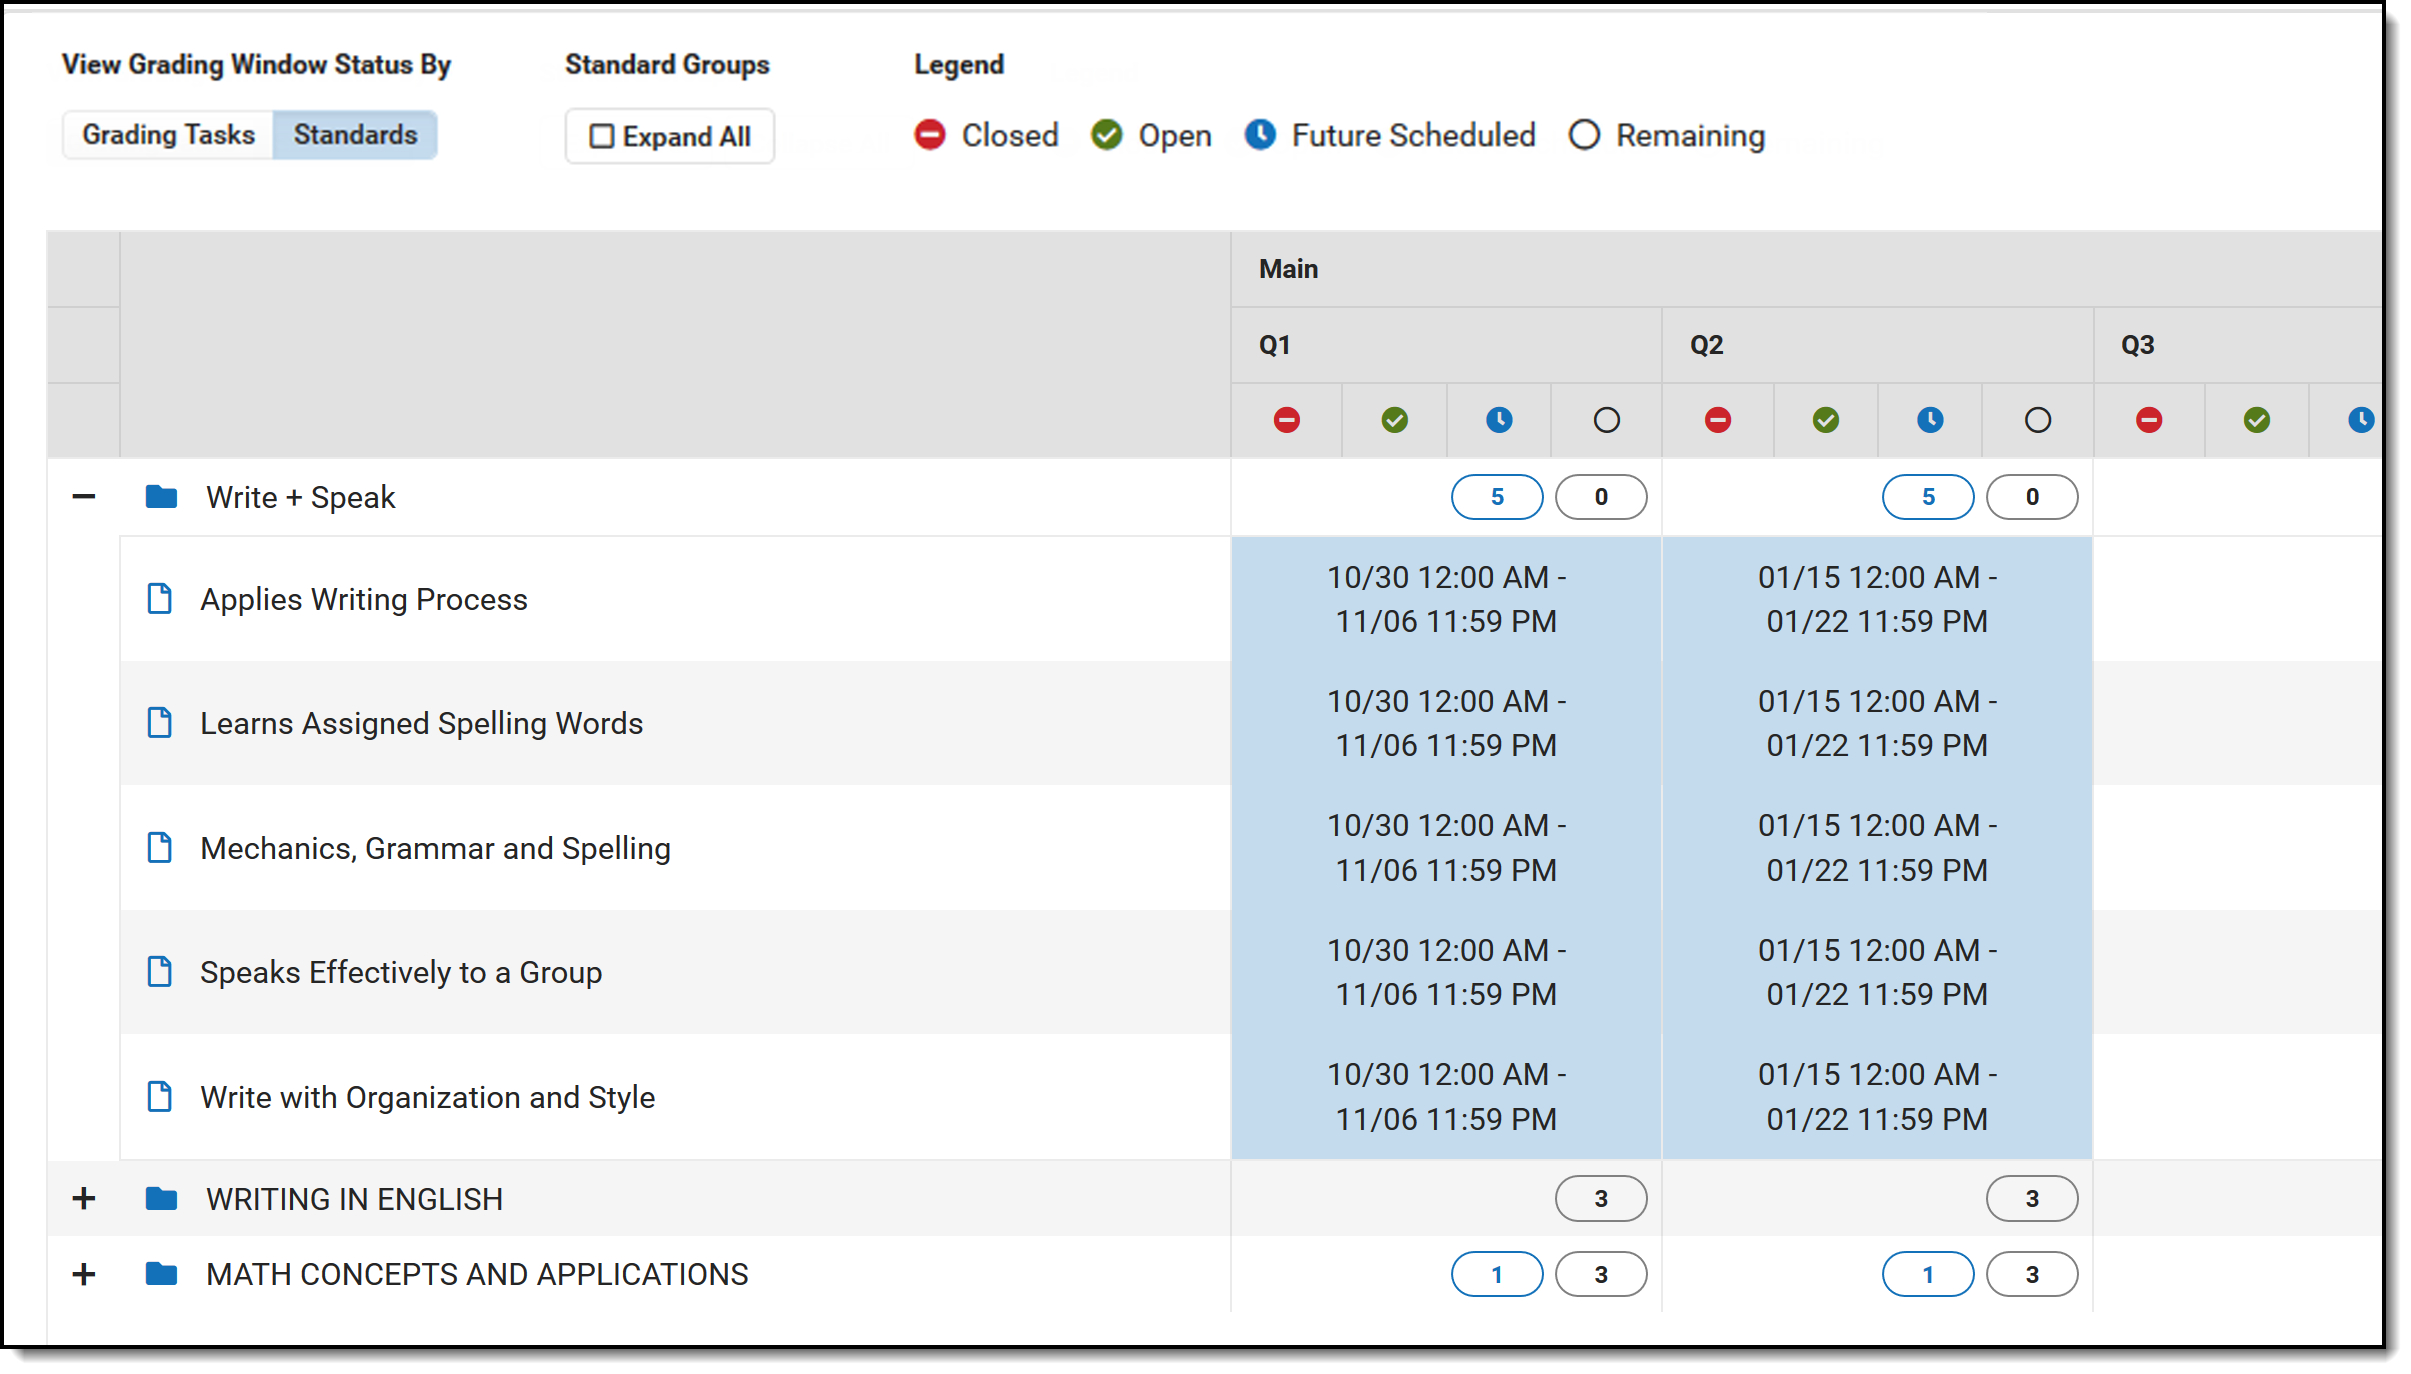 Screenshot showing how to view scheduled grading windows by standards.